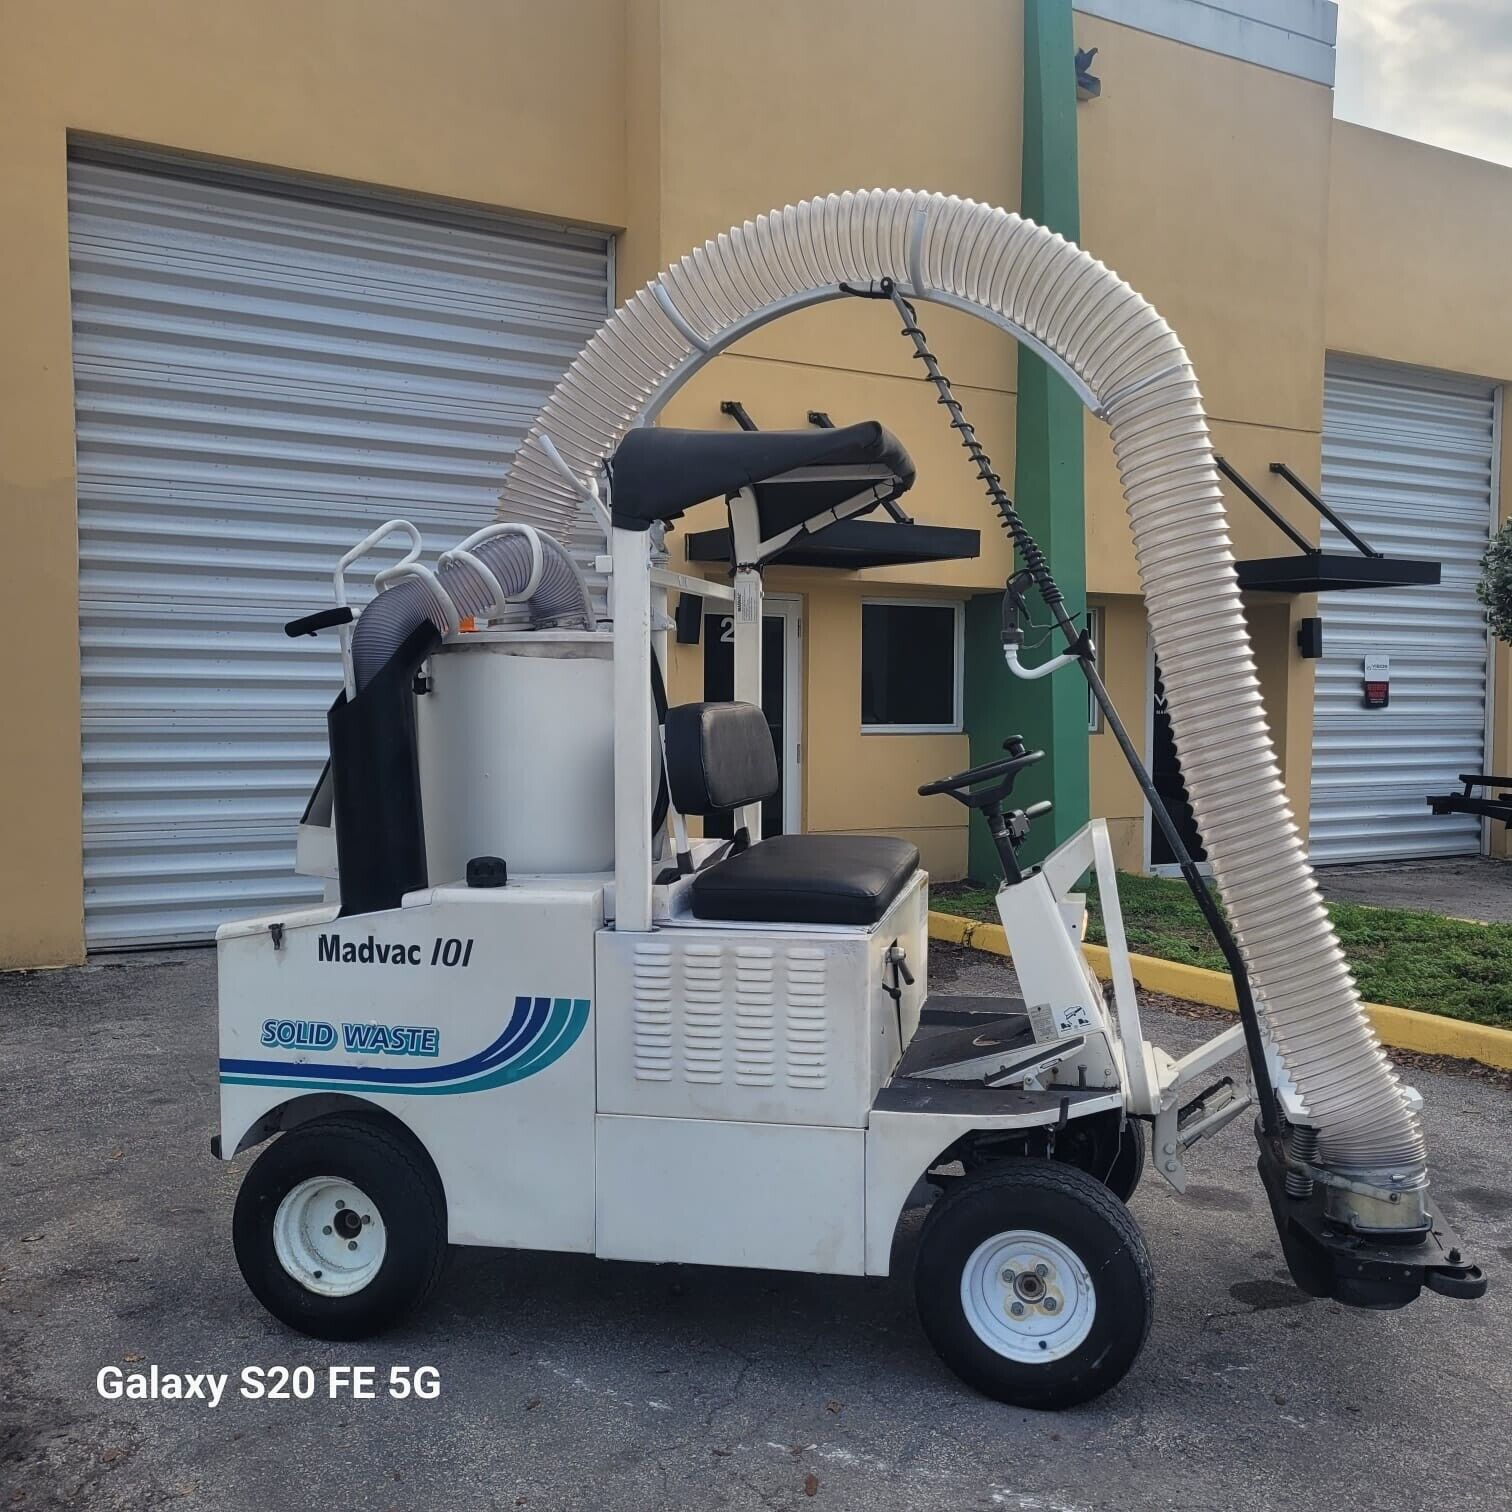 2004 Madvac 101-D -Ride on Vacuum Litter Collector